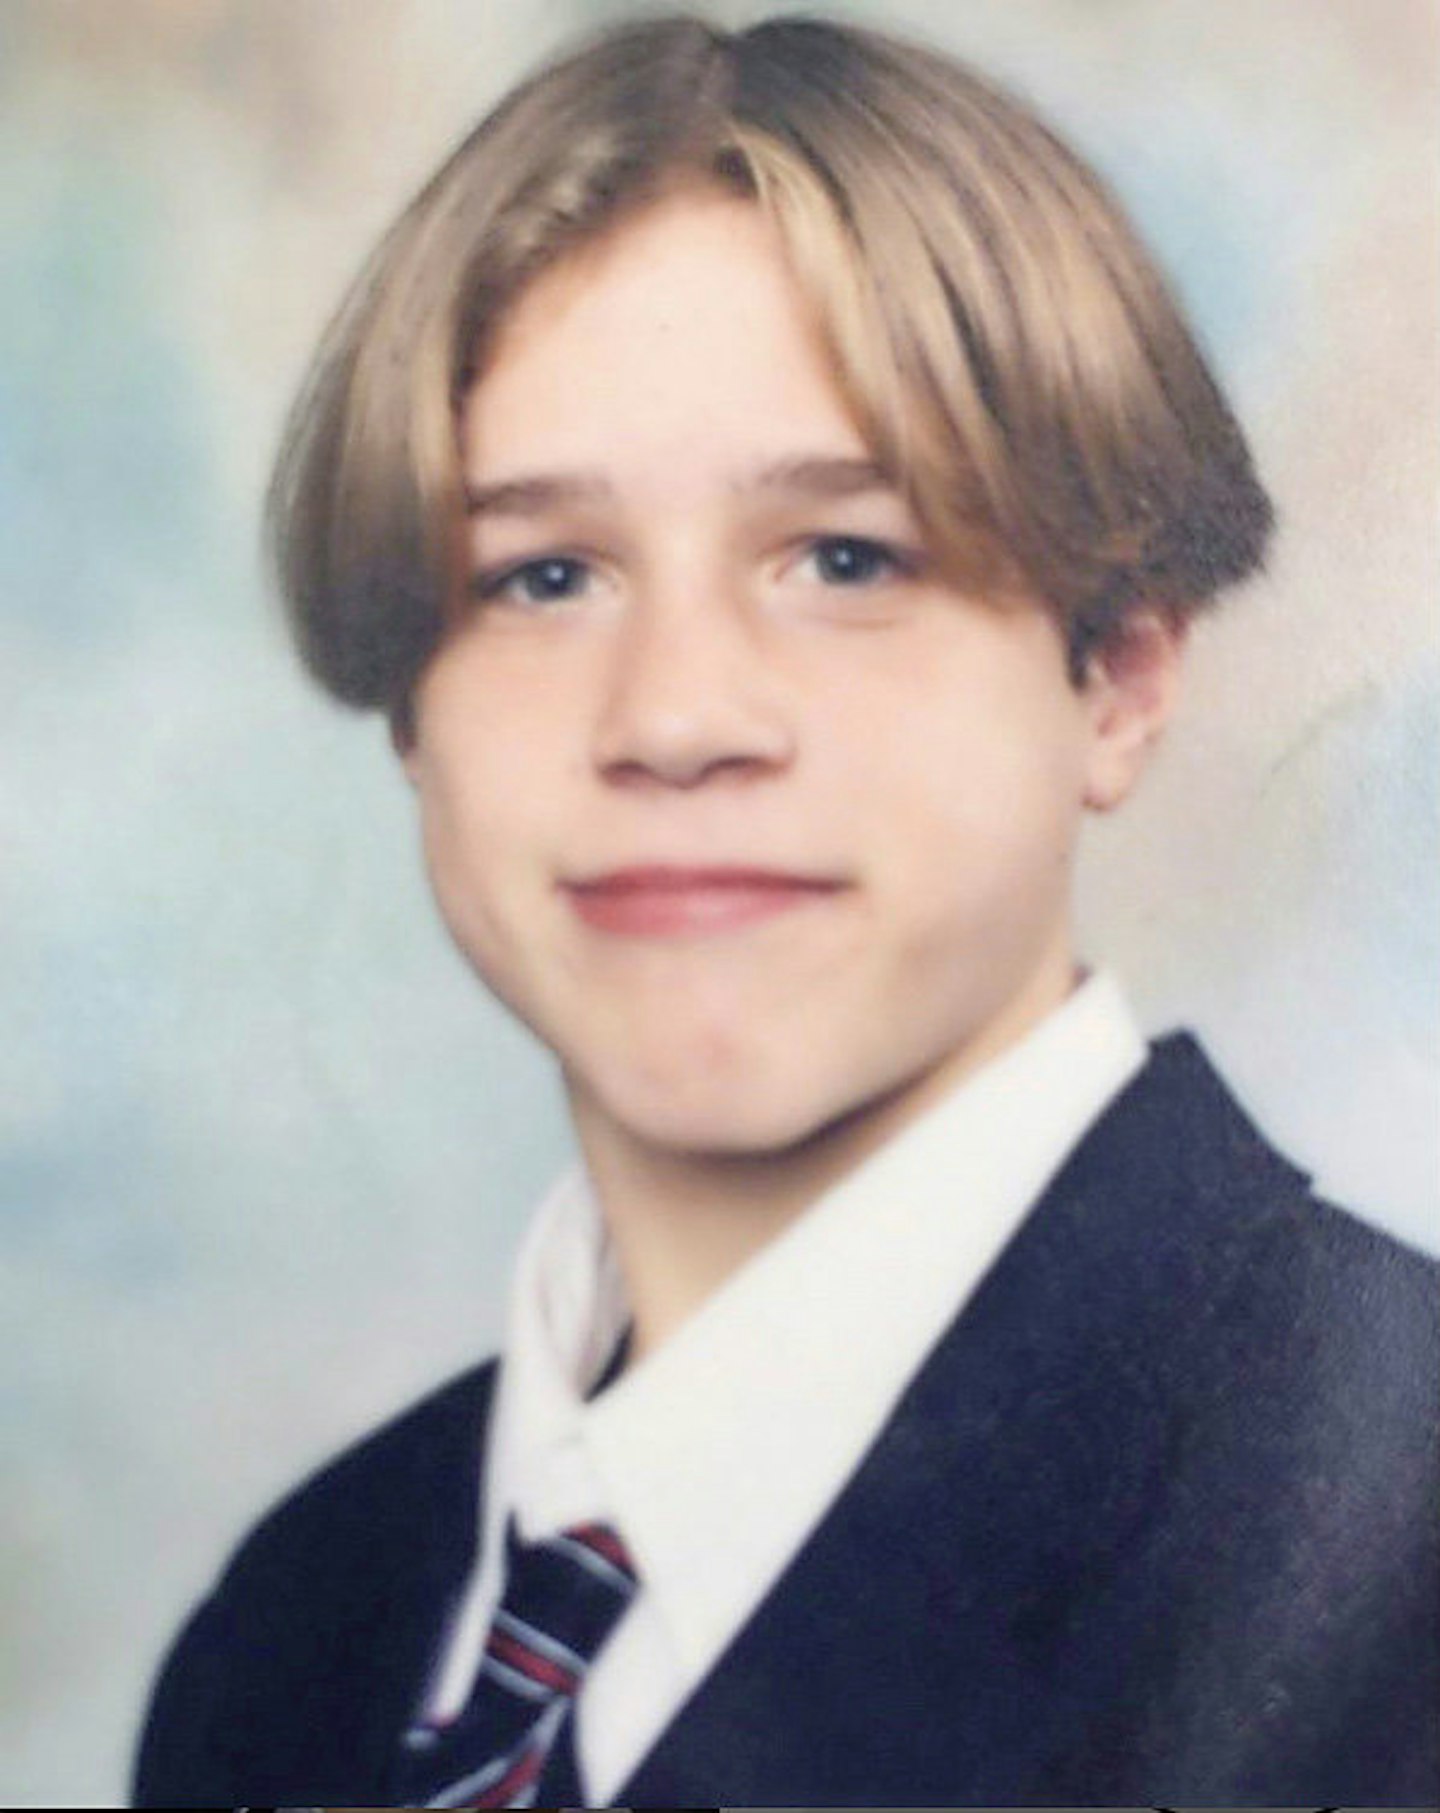 olly murs young school photo